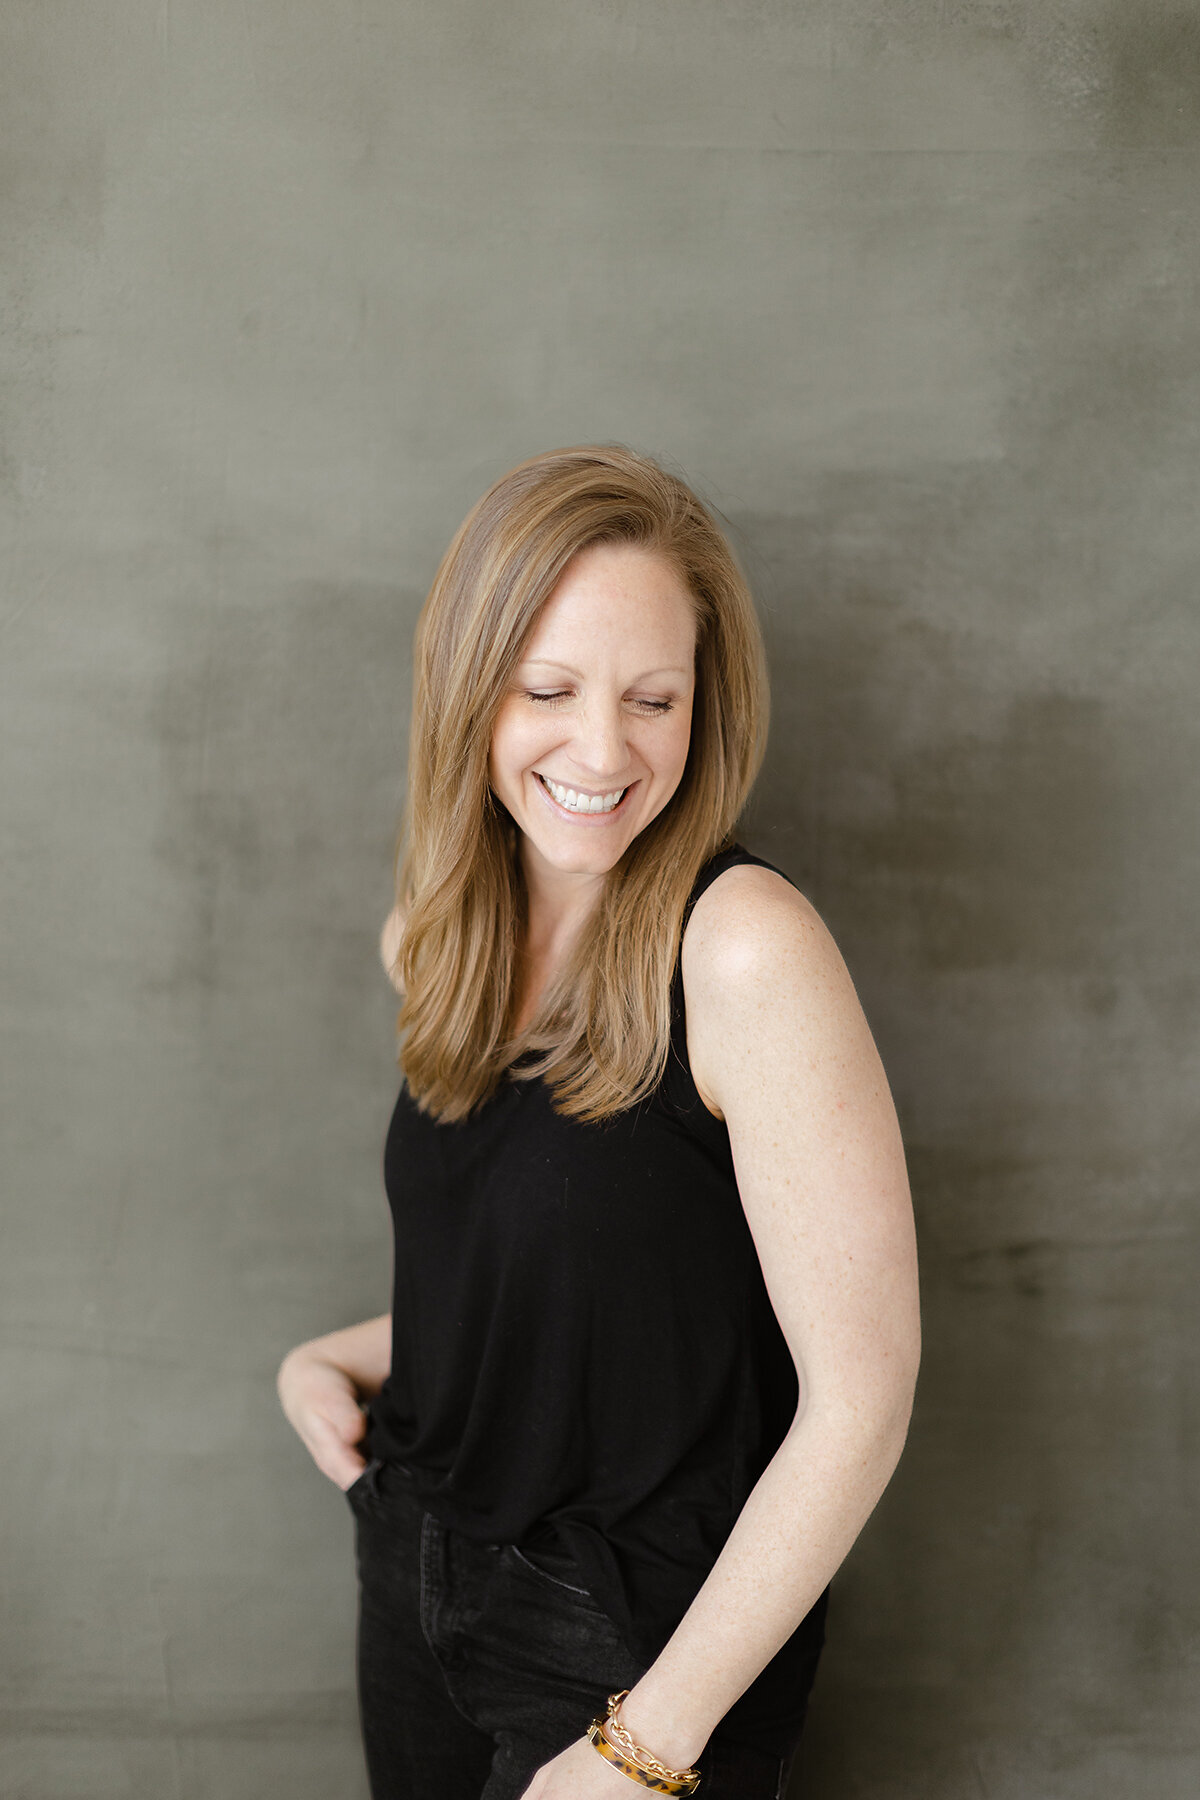 Professional headshot photo of a DFW business woman leaning against the wall in a Dallas photography studio as she has one hand in her pocket looking down at the floor.